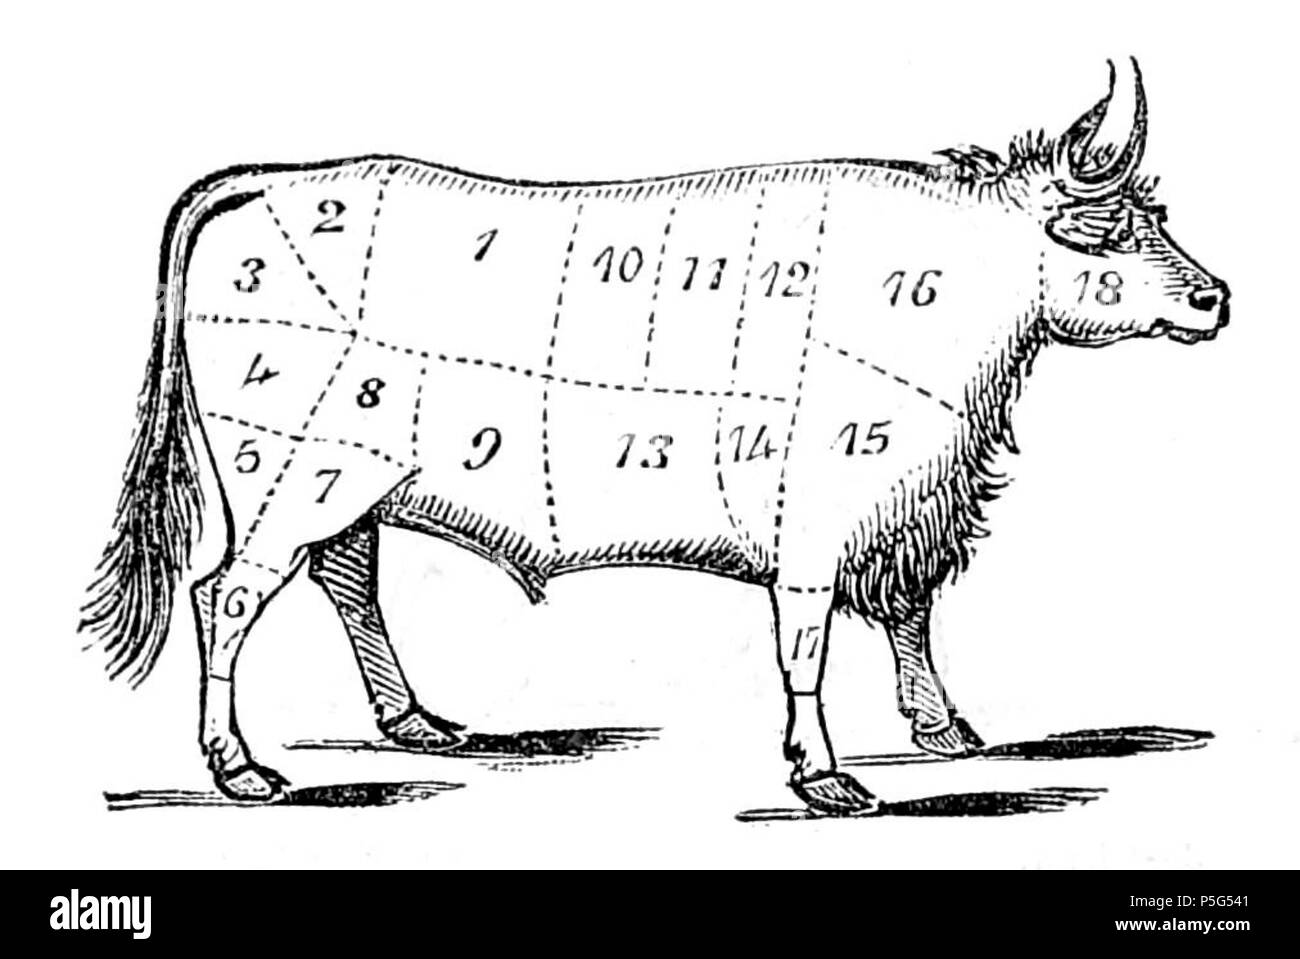 N/A. Joints of Beef. 1=Sirloin. 2=Rump. 3=Edge Bone. 4=Buttock. 5=Mouse Buttock. 6=Leg. 7=Thick Flank. 8=Veiny Piece. 9=Thin Flank / Fore Rib. 11=Middle Rib. 12=Chuck Rib. 13=Brisket. 14=Shoulder, or Leg of Mutton Piece. 15=Clod. 16=Neck, or Sticking Piece. 17=Shin. 18=Cheek. Sixth Edition, 1851. Anne Cobbett (1795-1877) 515 English Housekeeper Beef Stock Photo